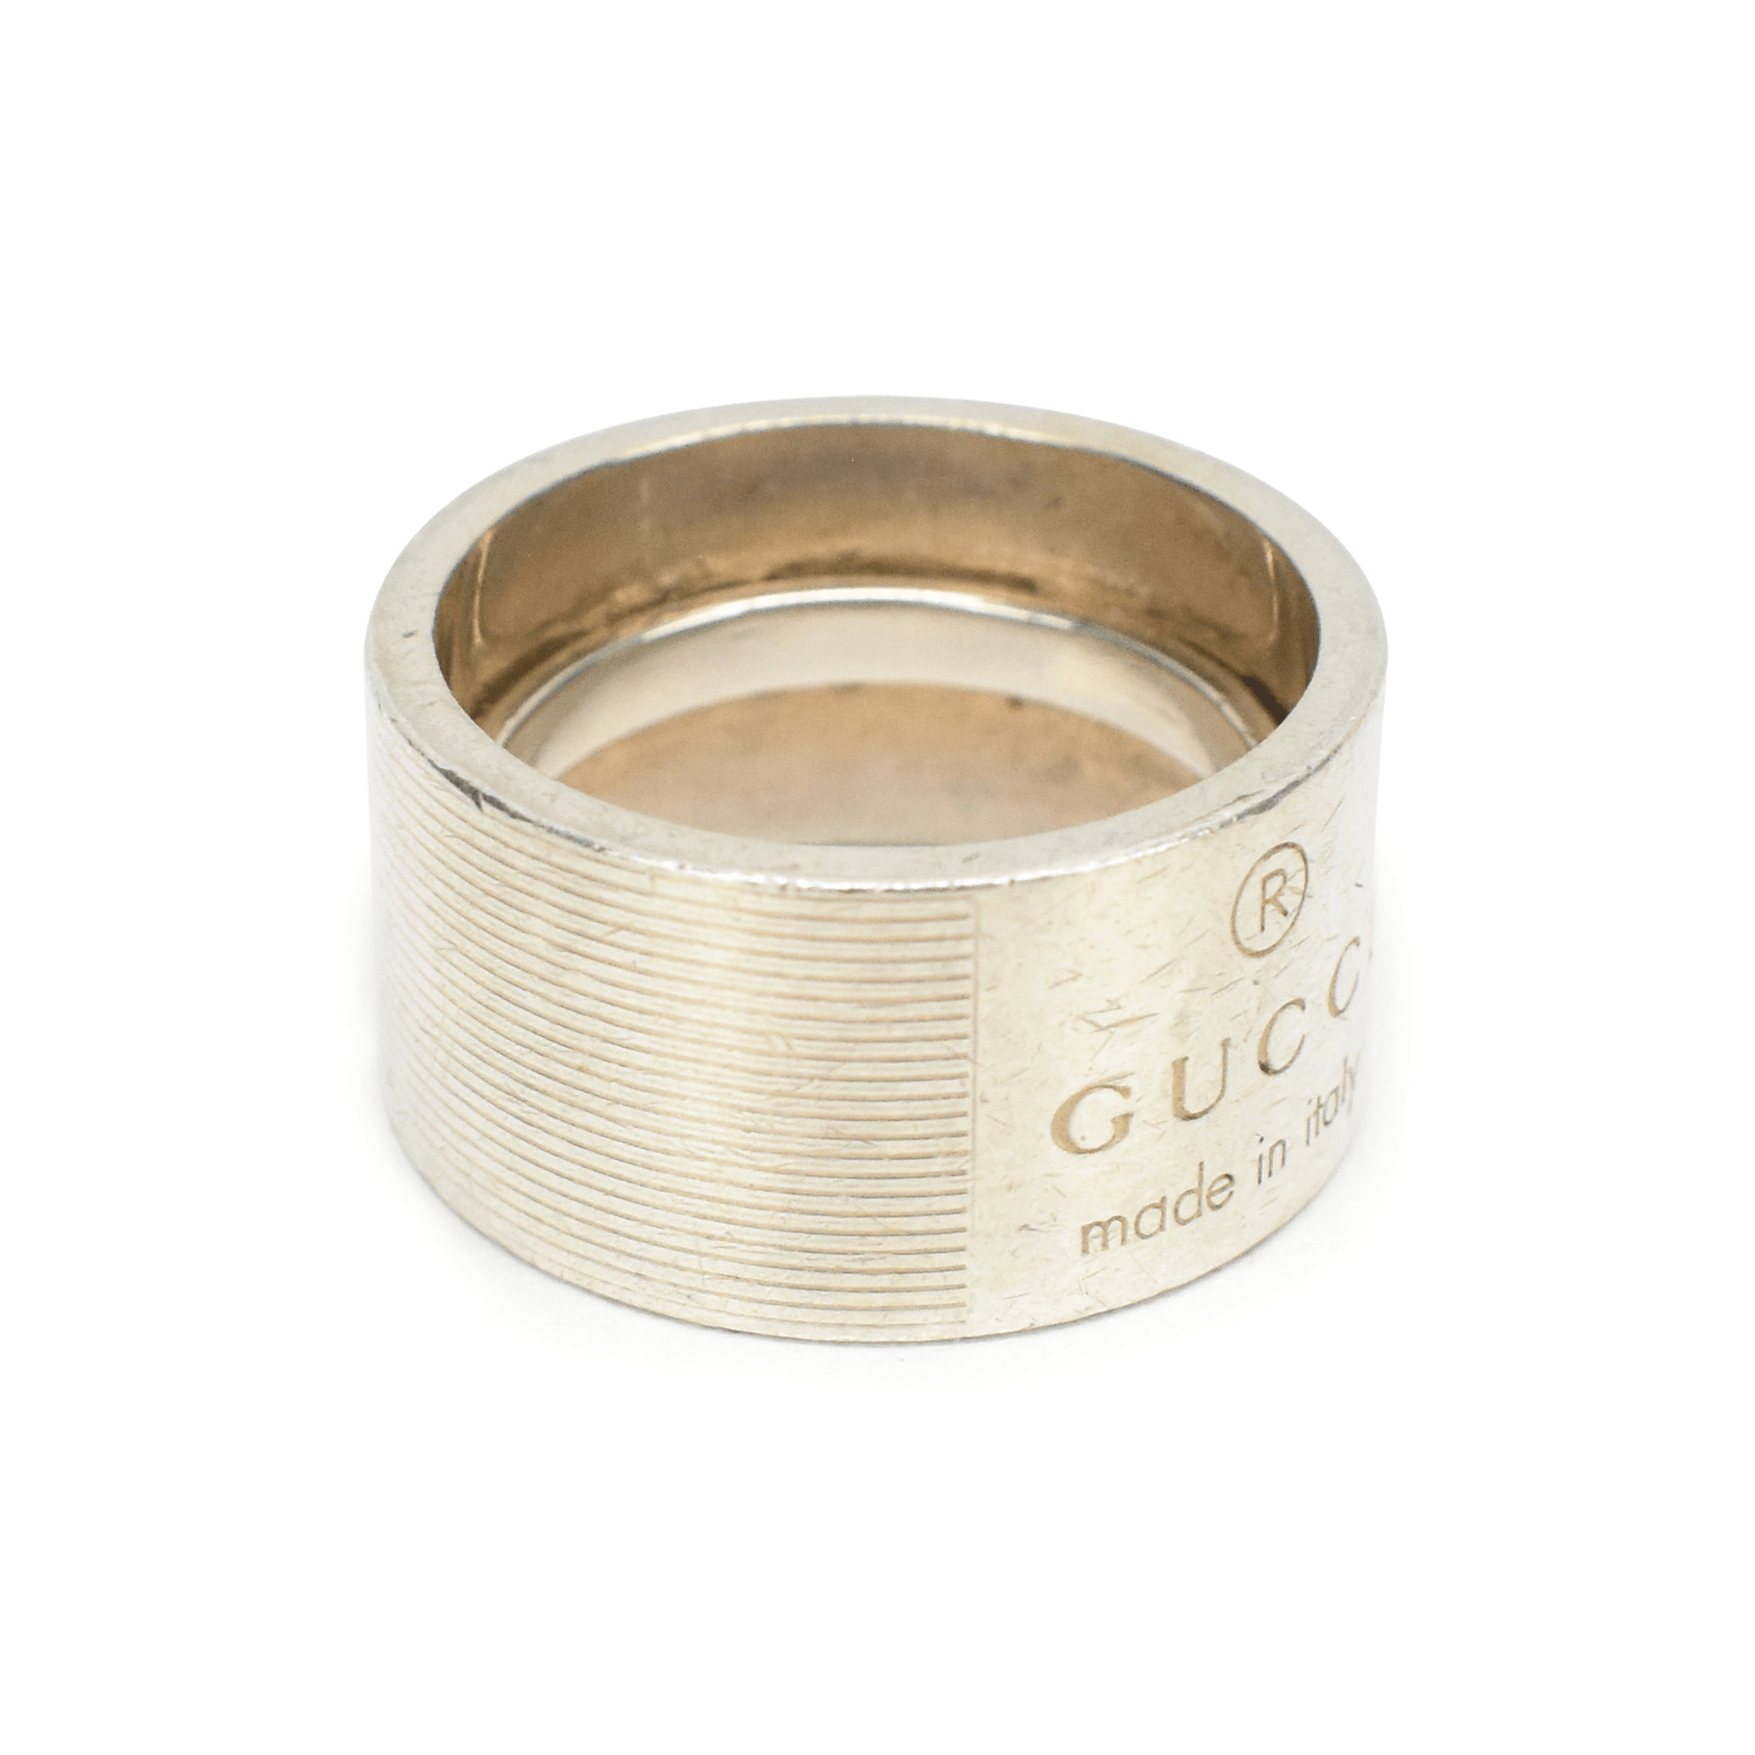 Gucci Ring - 7 - Fashionably Yours